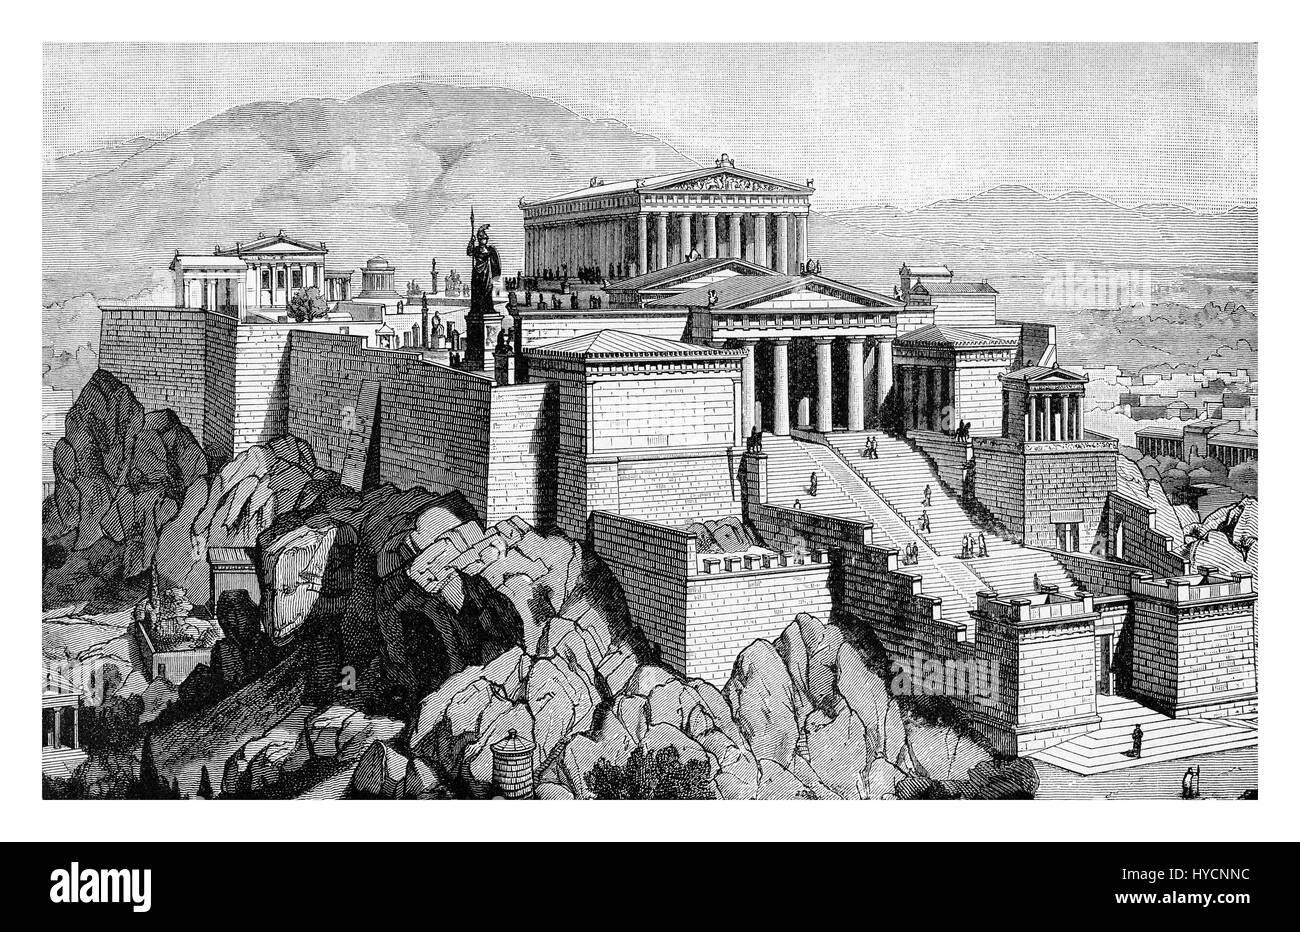 XIX century engraving describing how could have been the Acropolis of Athens in the antique times, not damaged over the course of centuries. Stock Photo